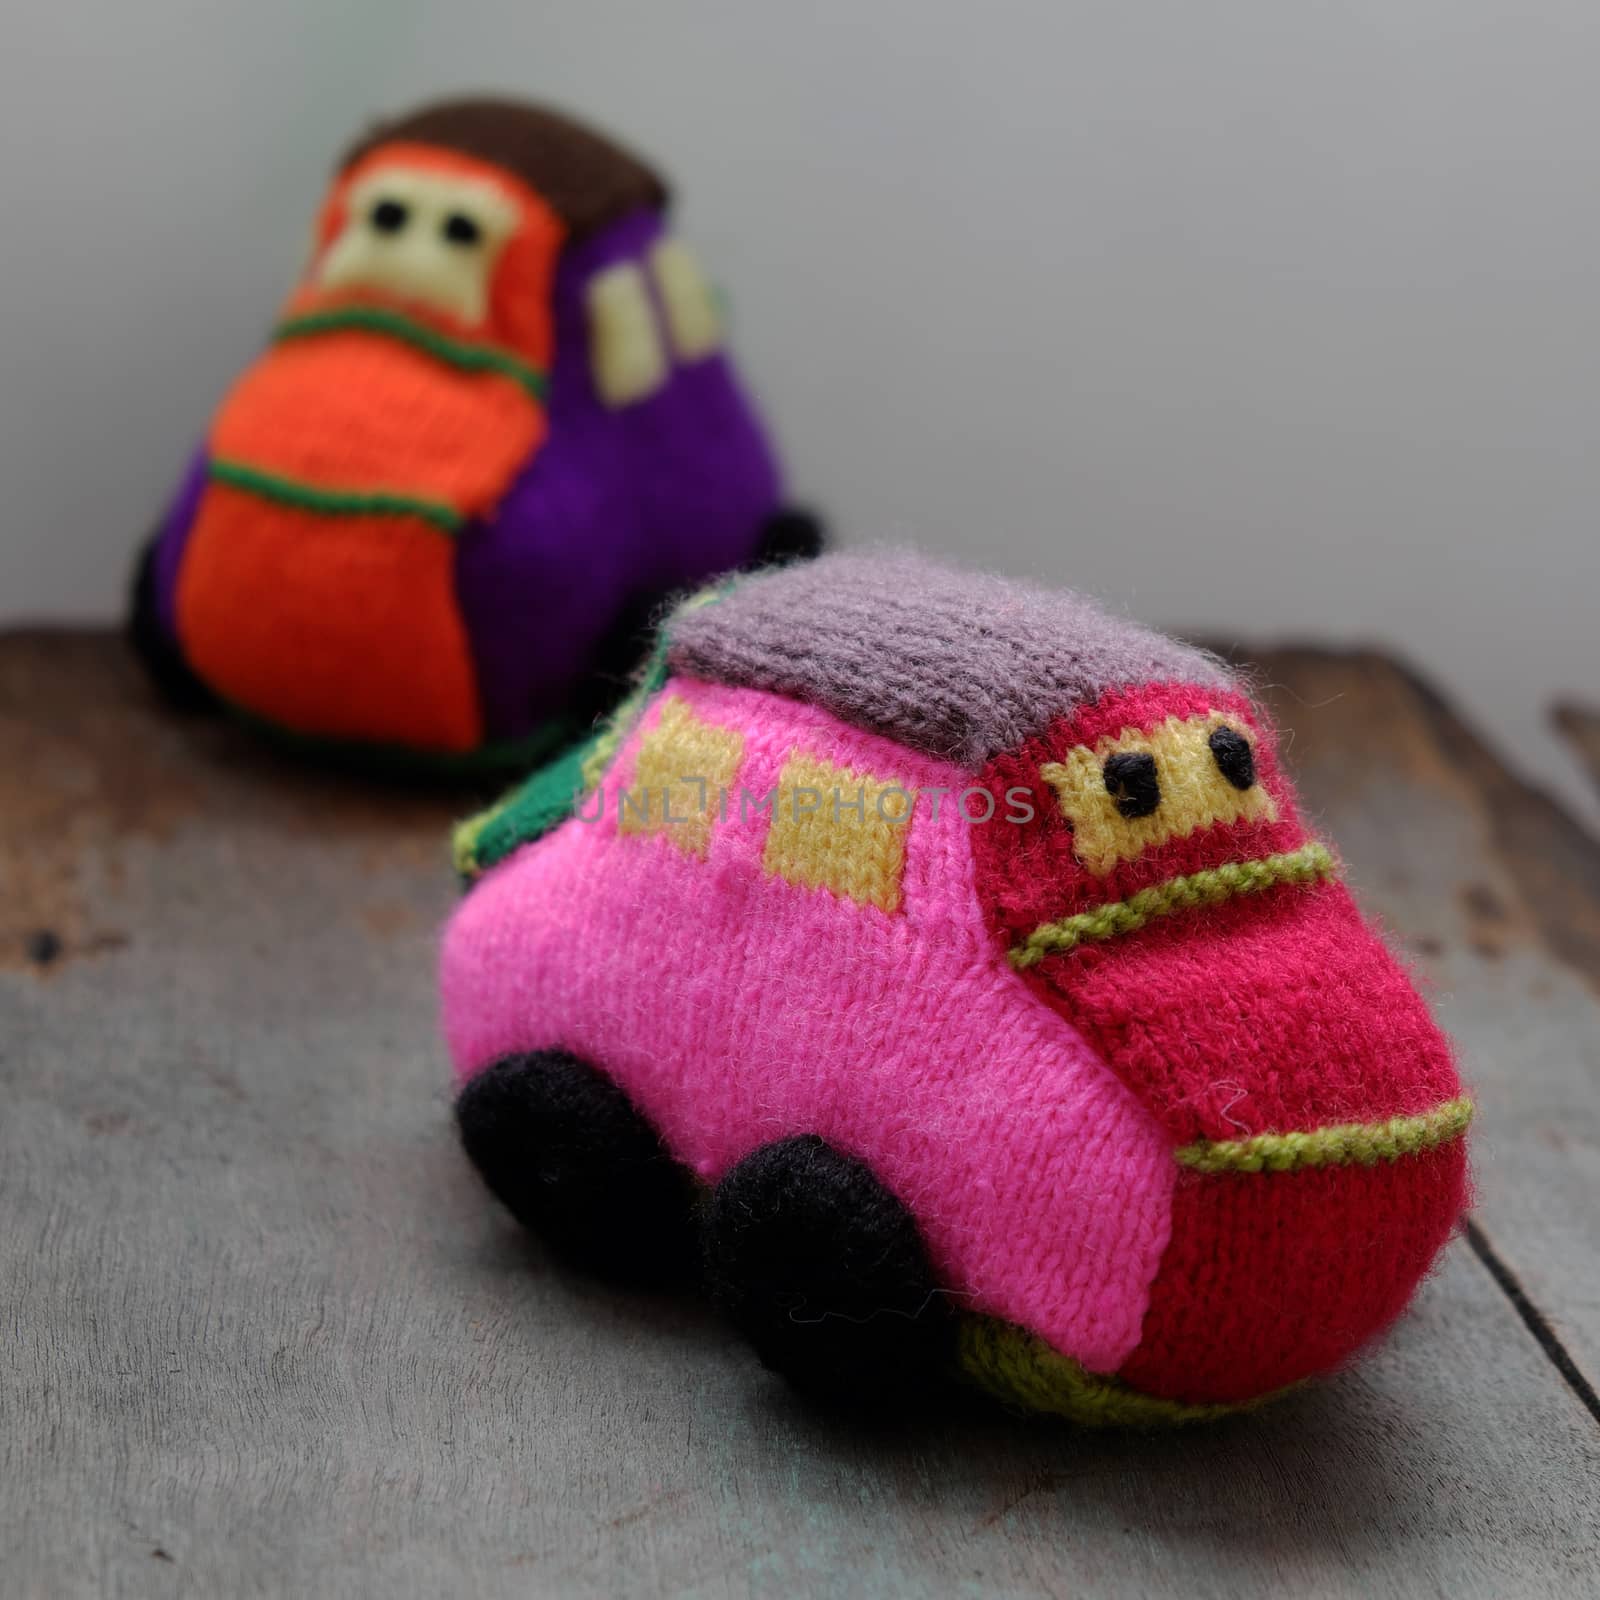 Handmade gift for children, two colorful baby car knit from yarn, funny emotion on couple car, homemade toy as amazing present